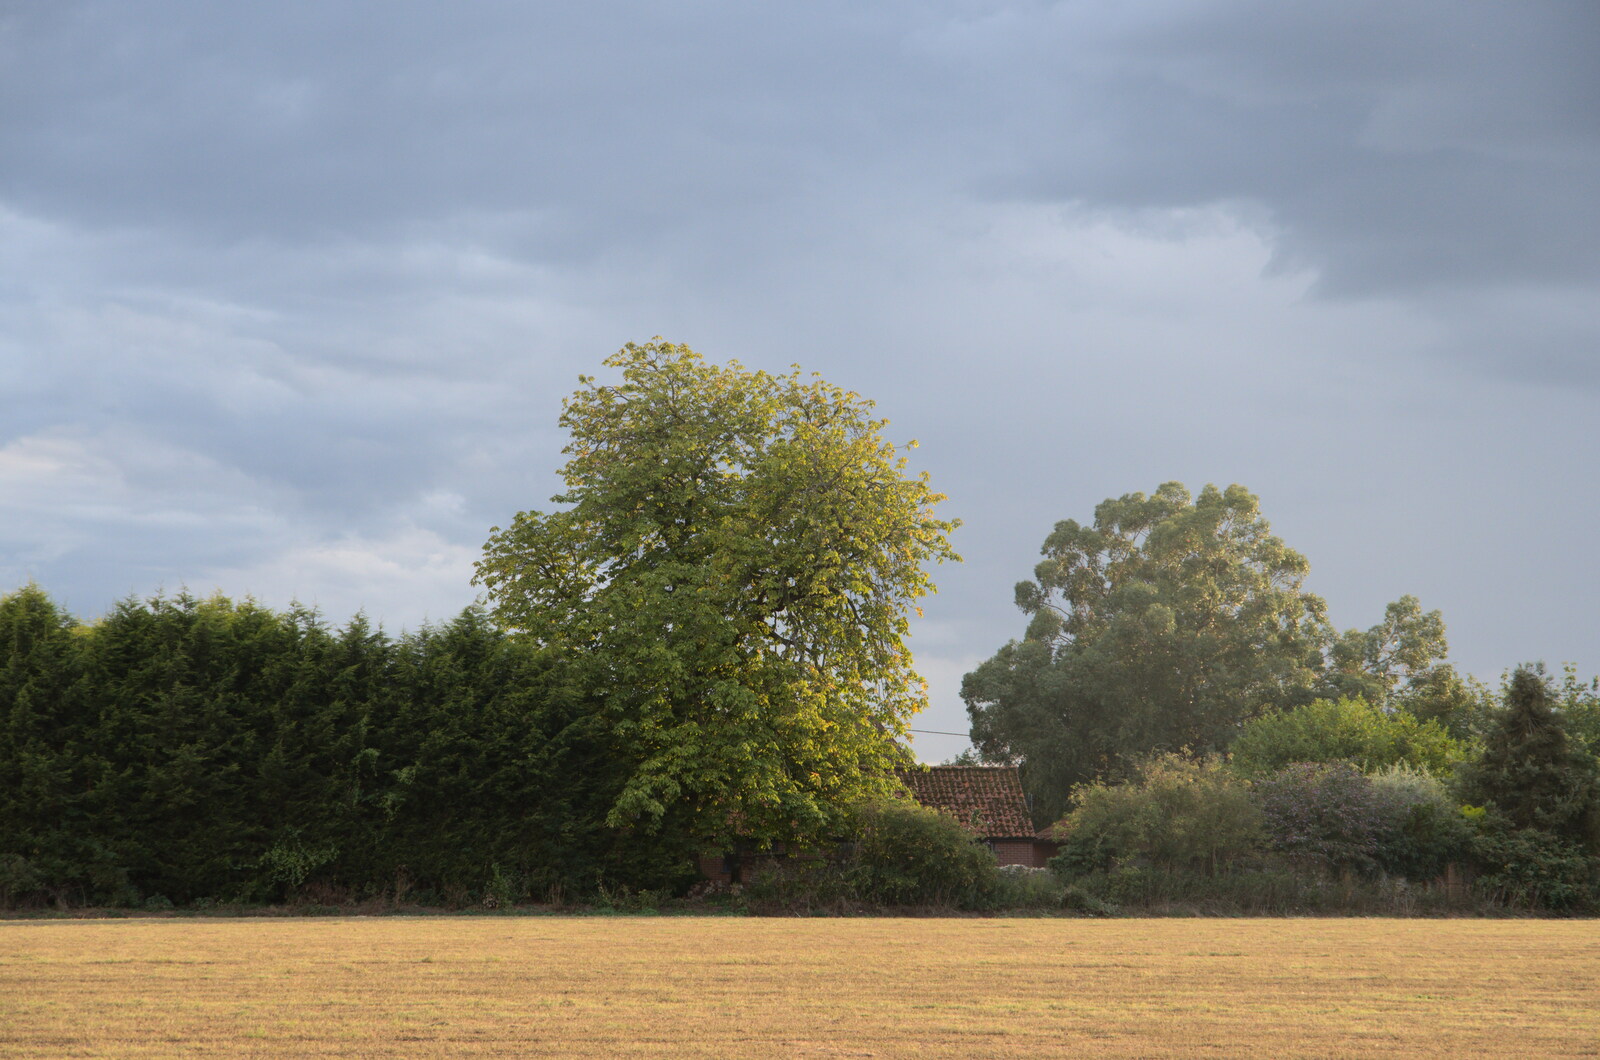 The trees across the side field from Closed-Down Shops, Hedgehogs and Chamomile, Brome and Diss - 2nd August 2020